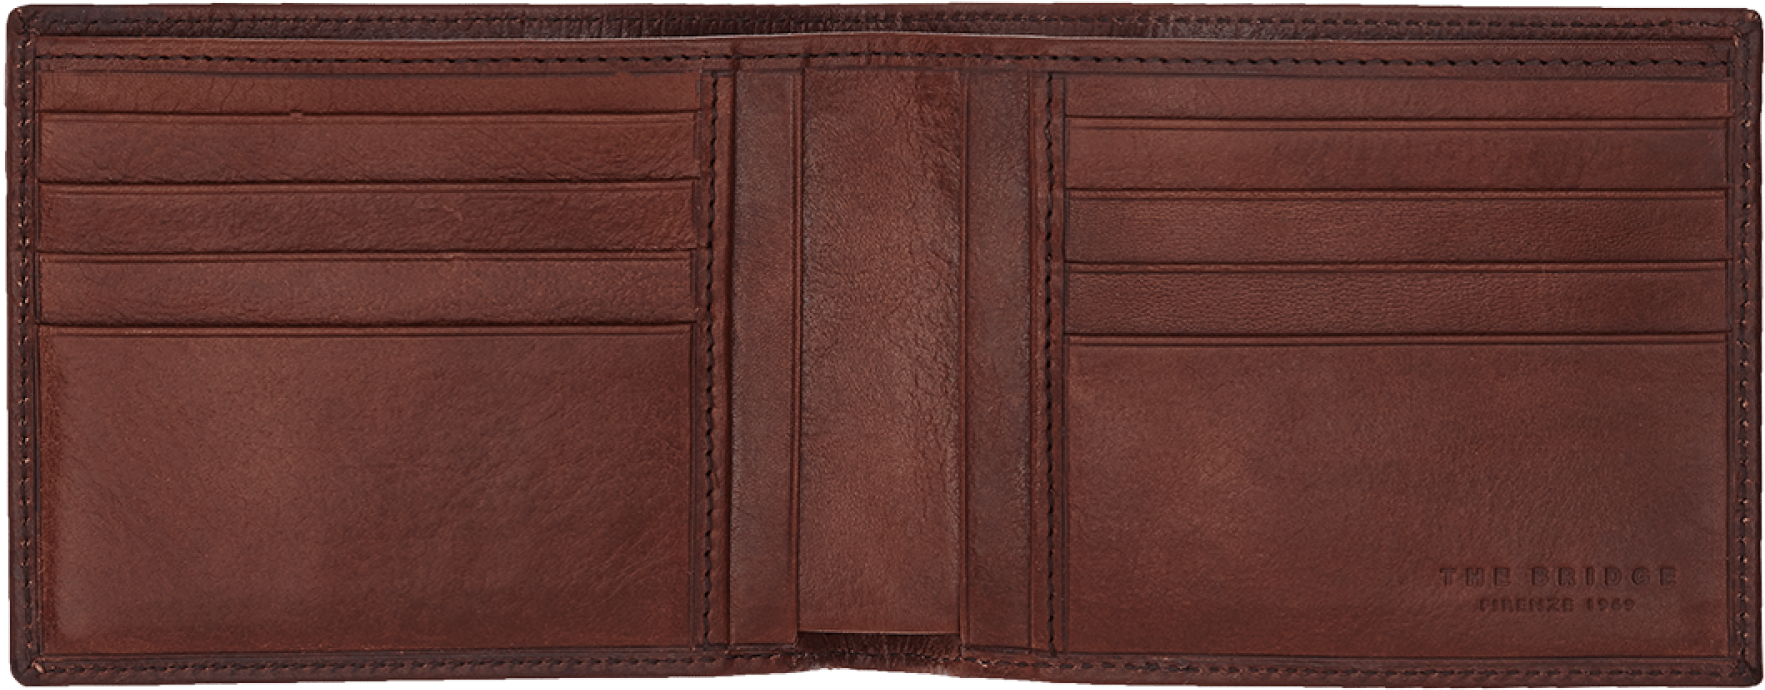 Brown Leather Bifold Wallet PNG